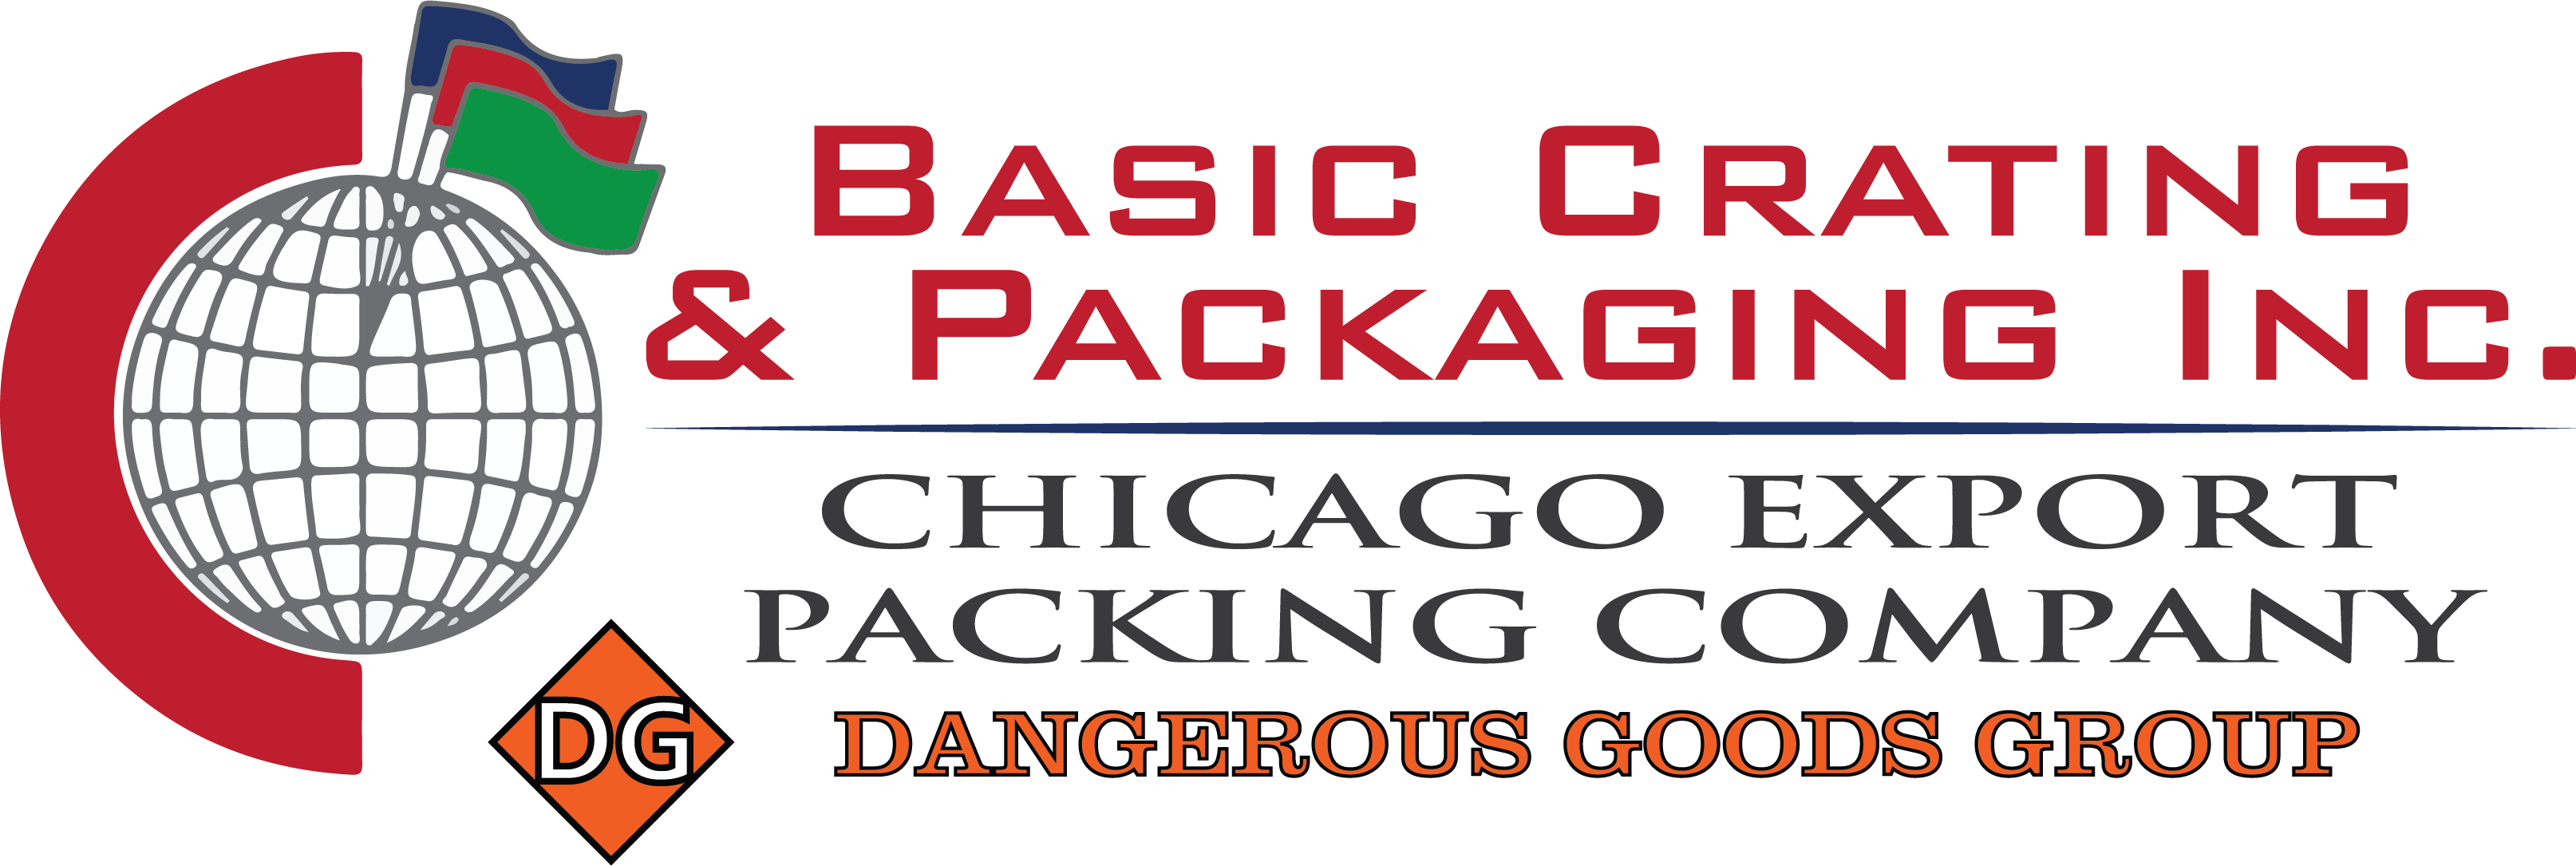 Basic Crating & Packaging Inc. | Chicago Export Packing Company